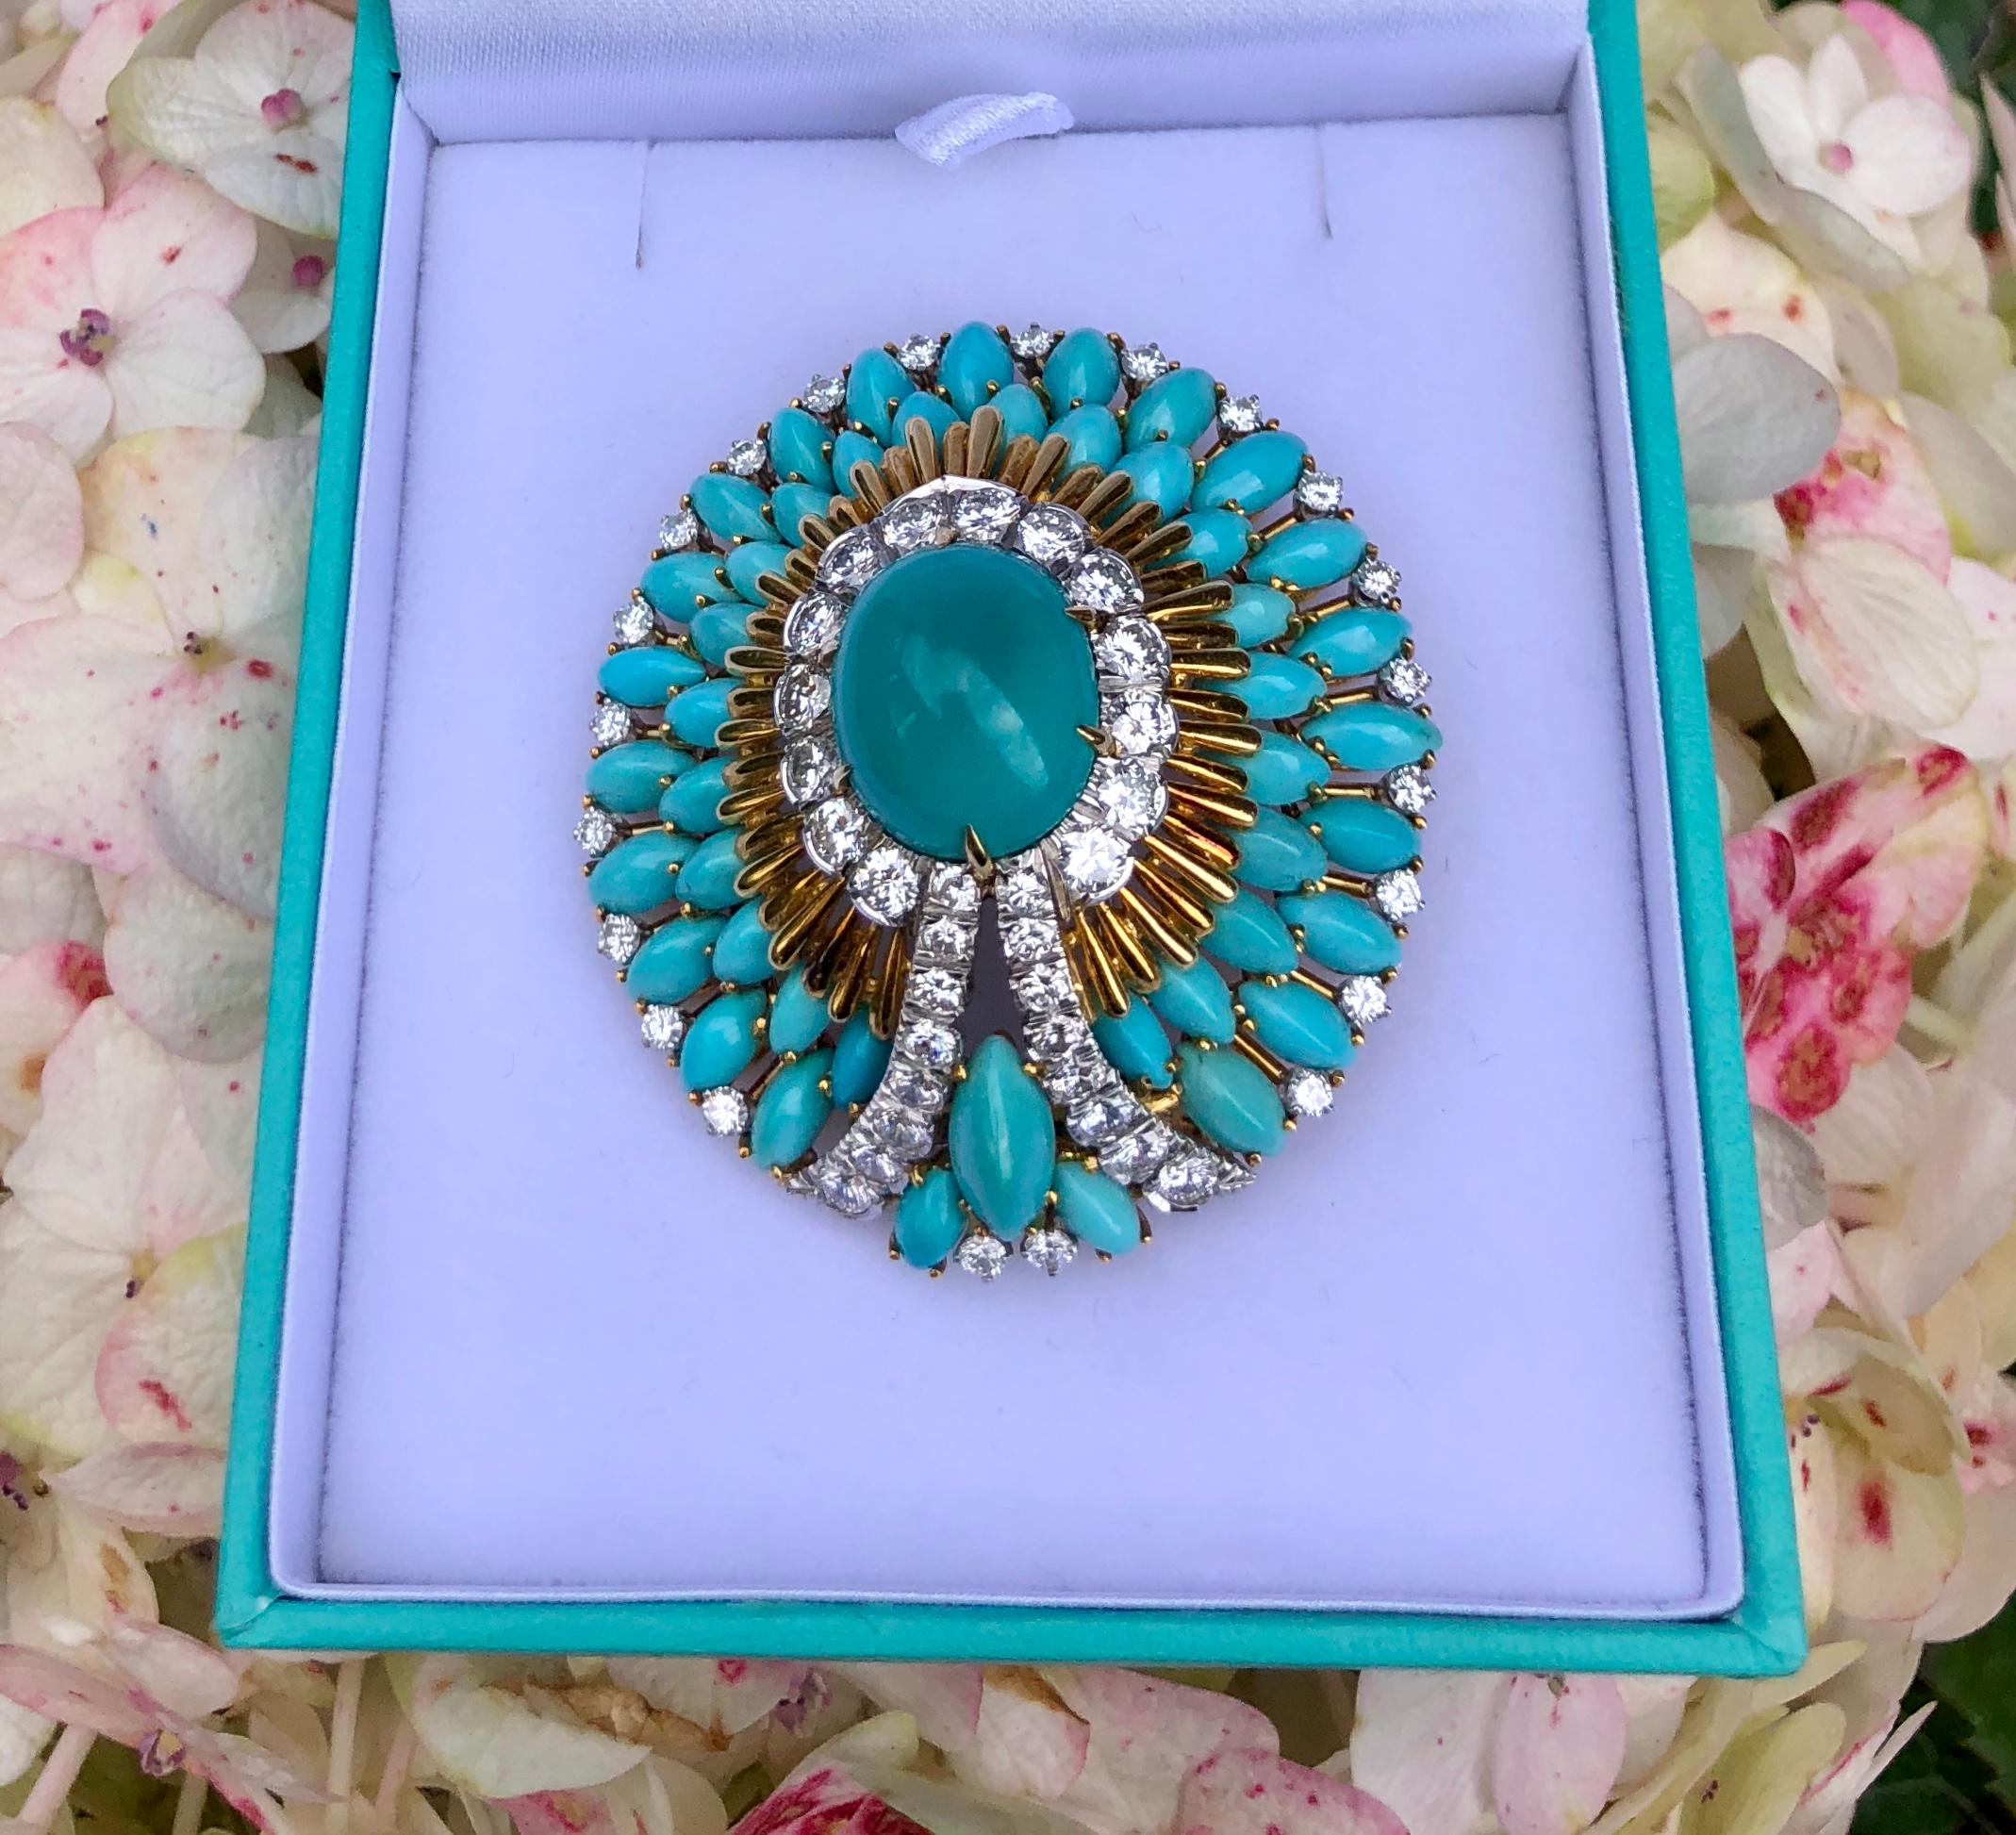 Magnificently elegant, handmade large, 18 karat yellow gold Art Deco style, estate brooch pin features a top quality robin's egg blue color oval cut Persian turquoise stone weighing approximately 10.9 carats. This fantastic stone is talon prong set